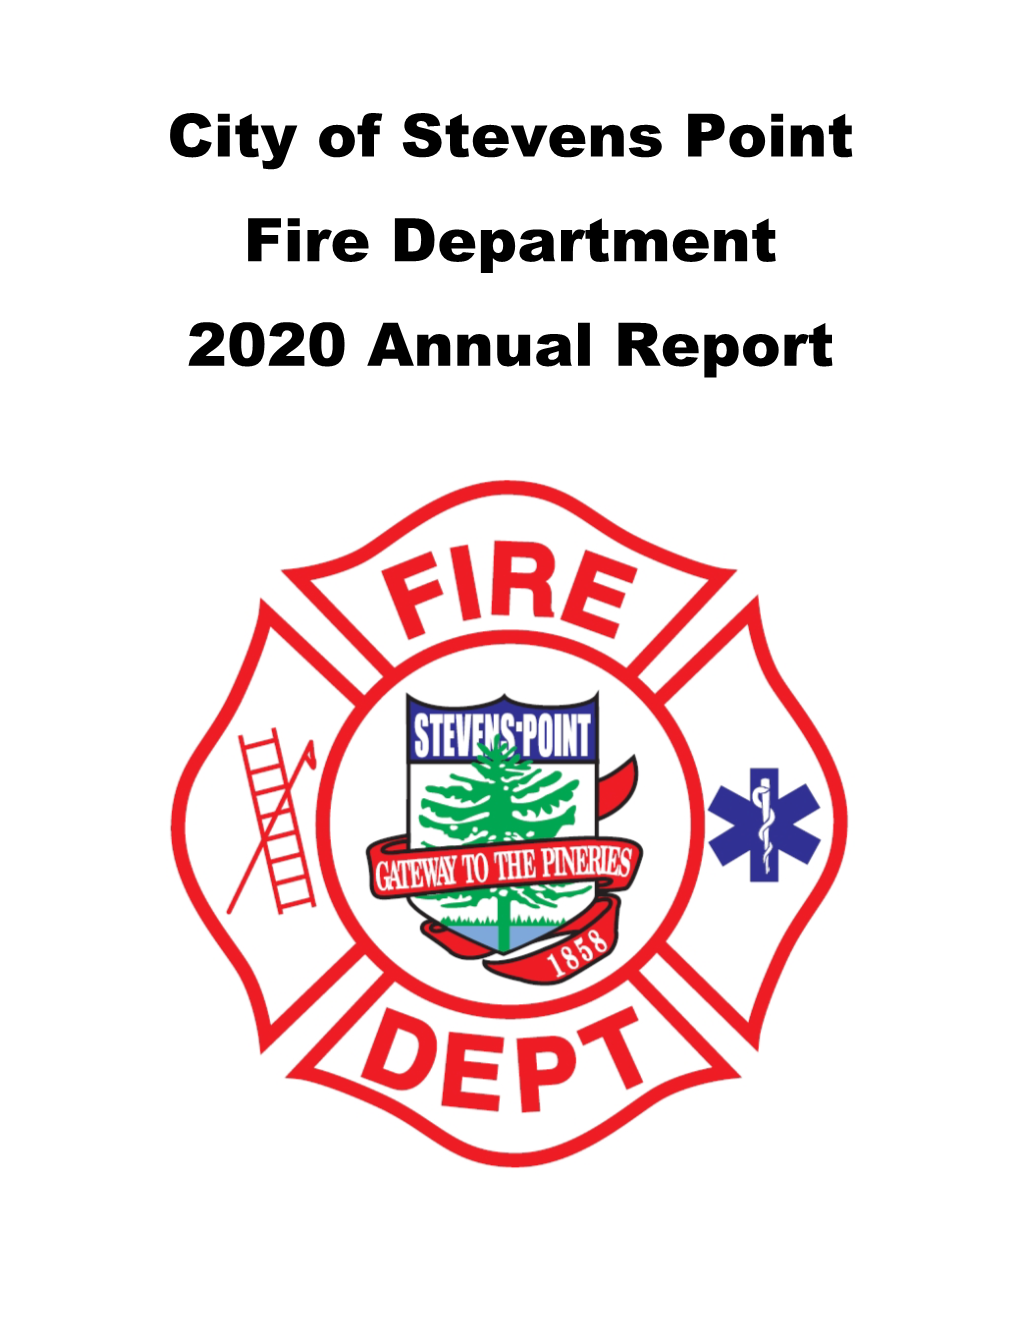 See the 2020 Fire Department Annual Report